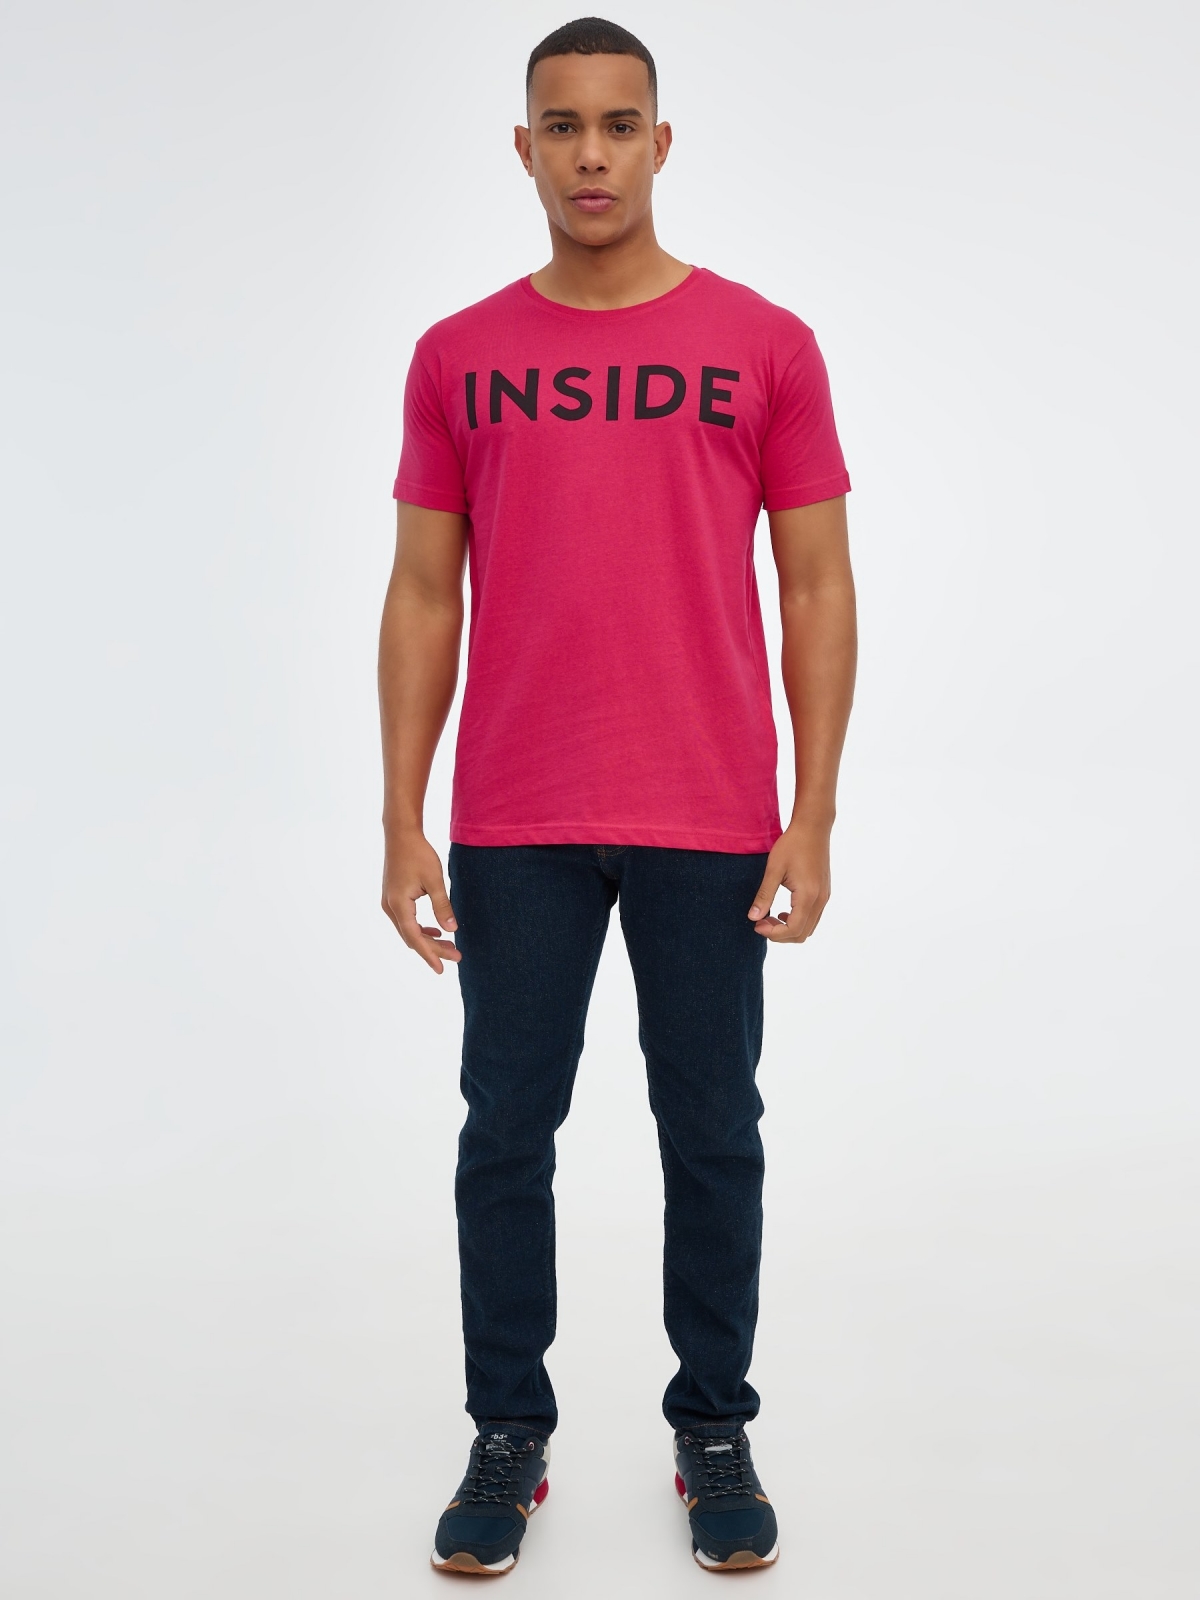 INSIDE basic T-shirt red front view